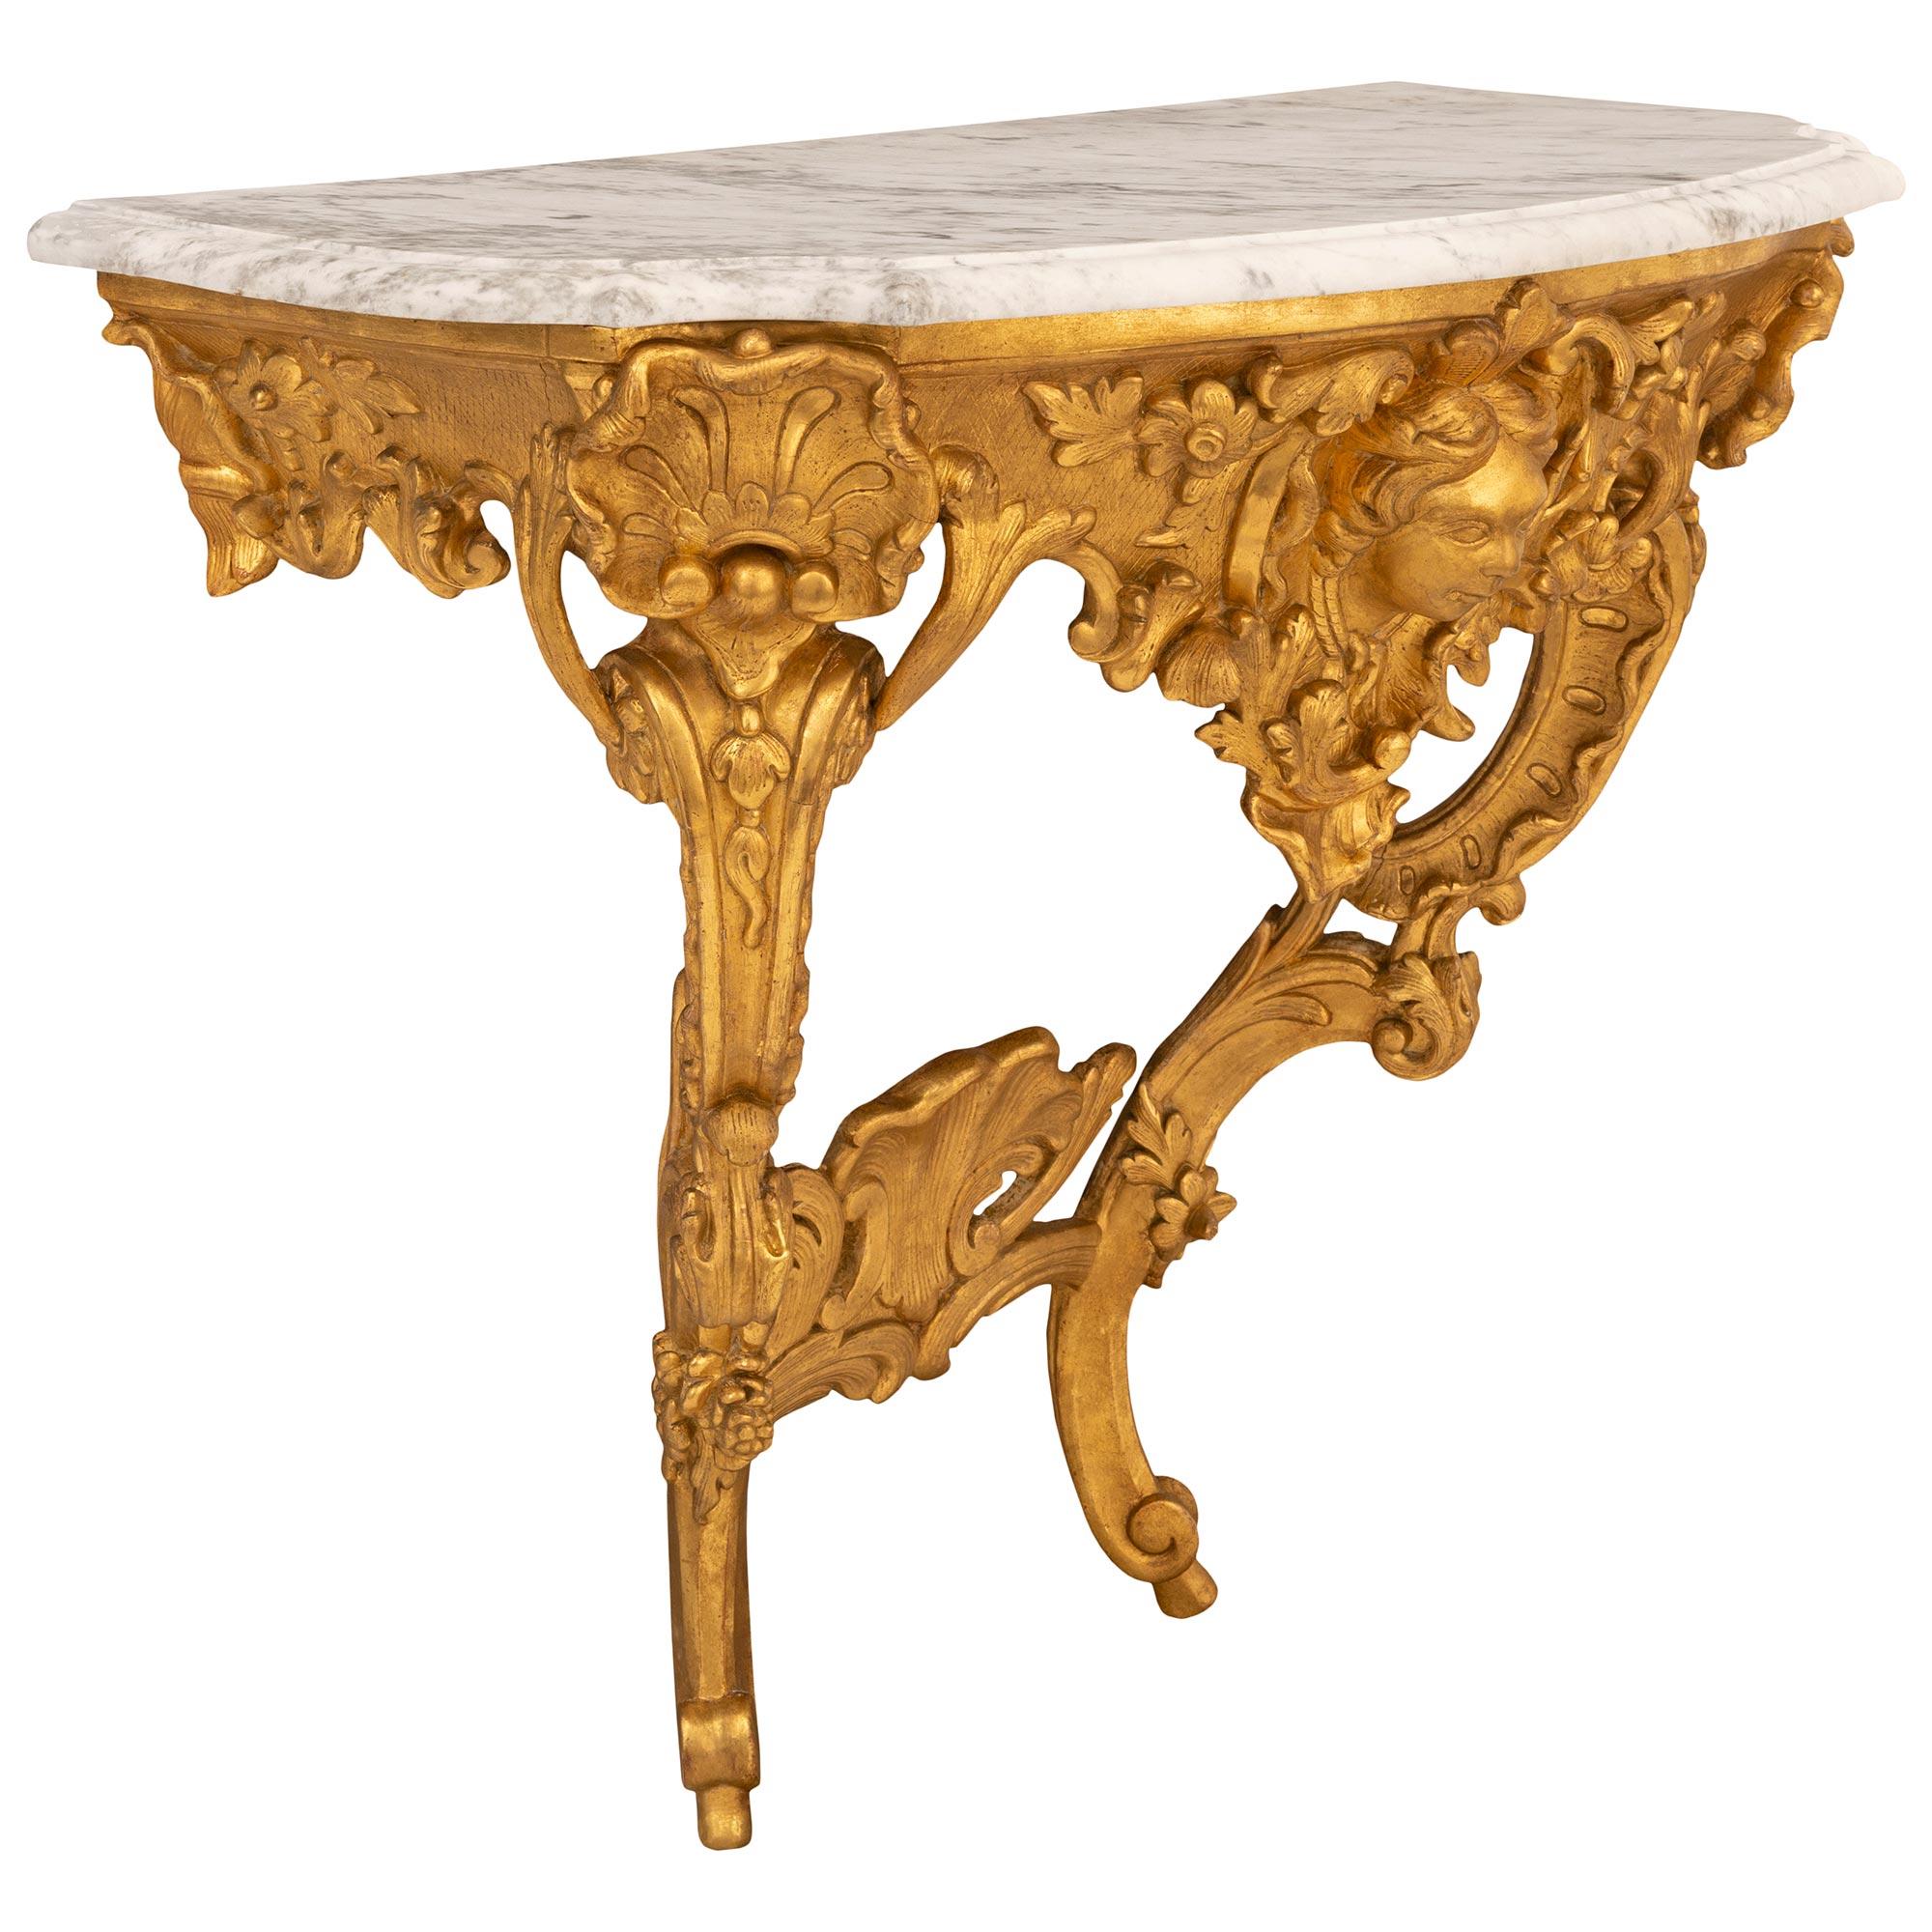 True Pair of Italian 18th Century Louis XV Period Giltwood and Marble Consoles In Good Condition For Sale In West Palm Beach, FL